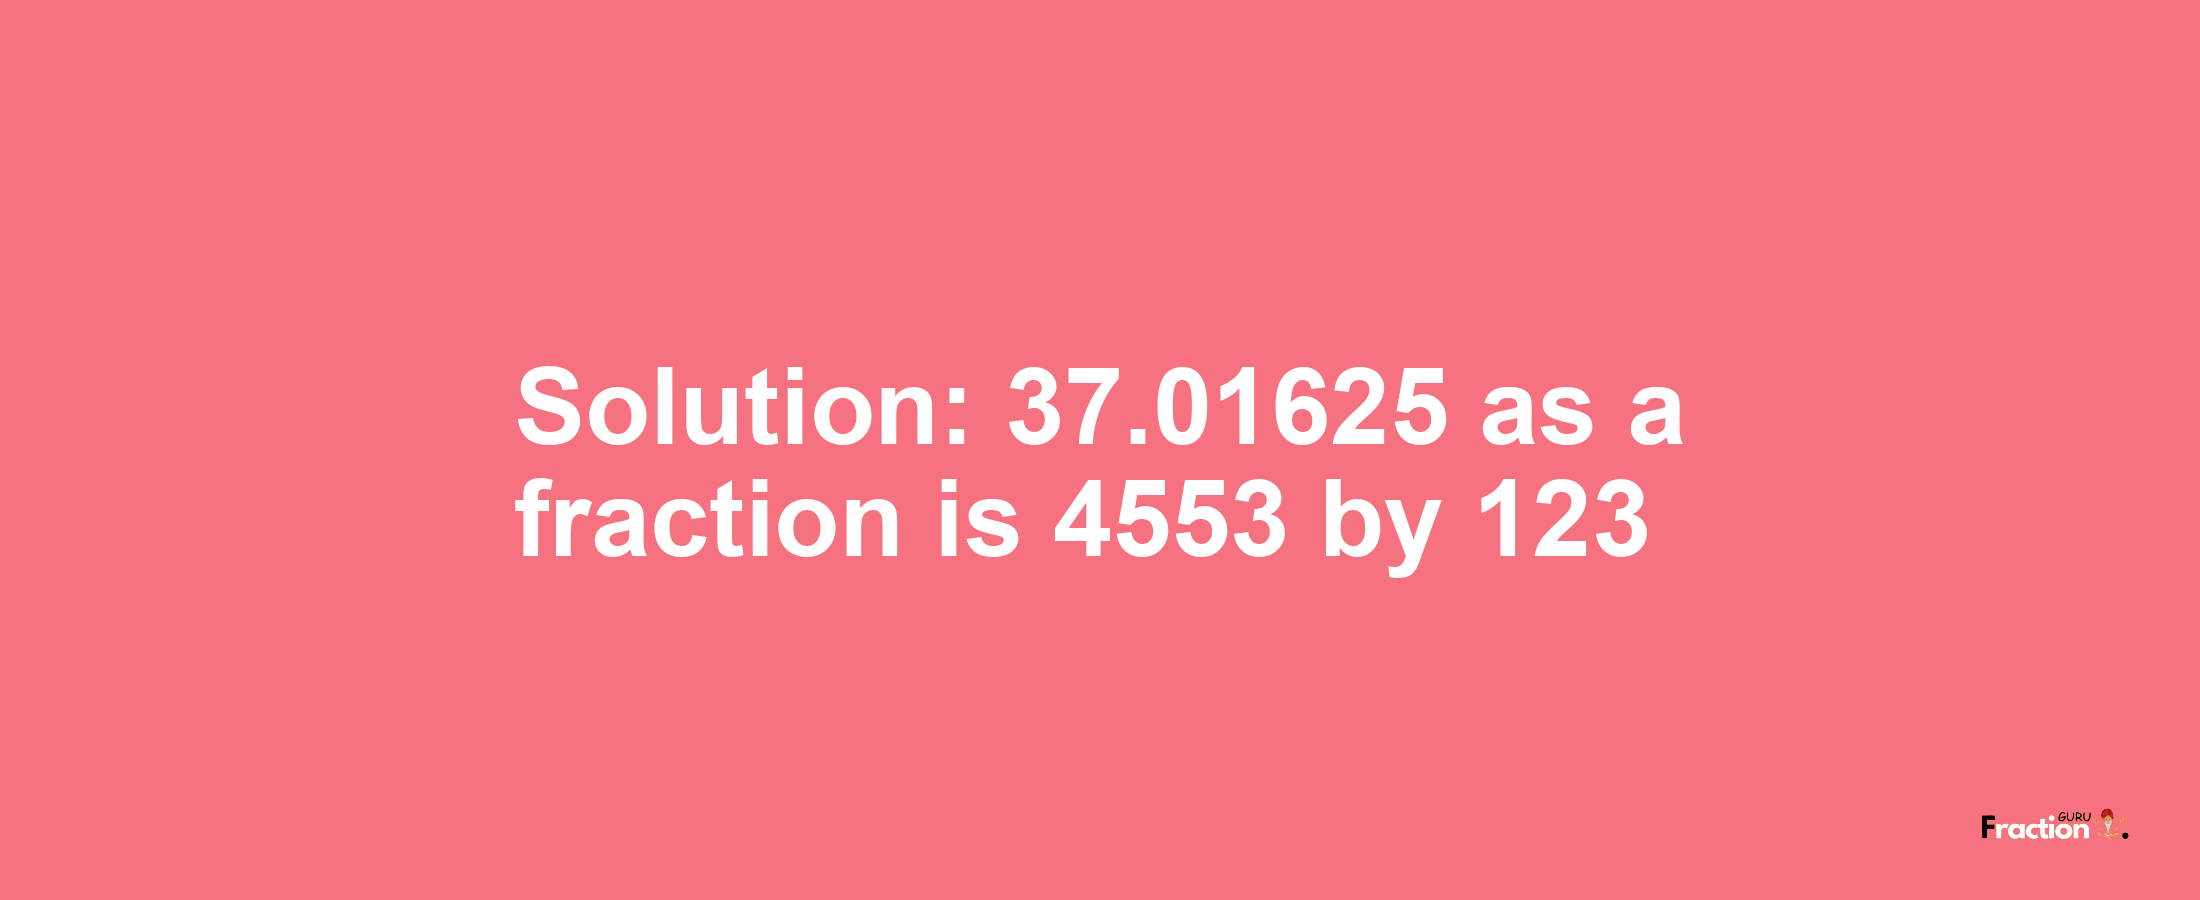 Solution:37.01625 as a fraction is 4553/123